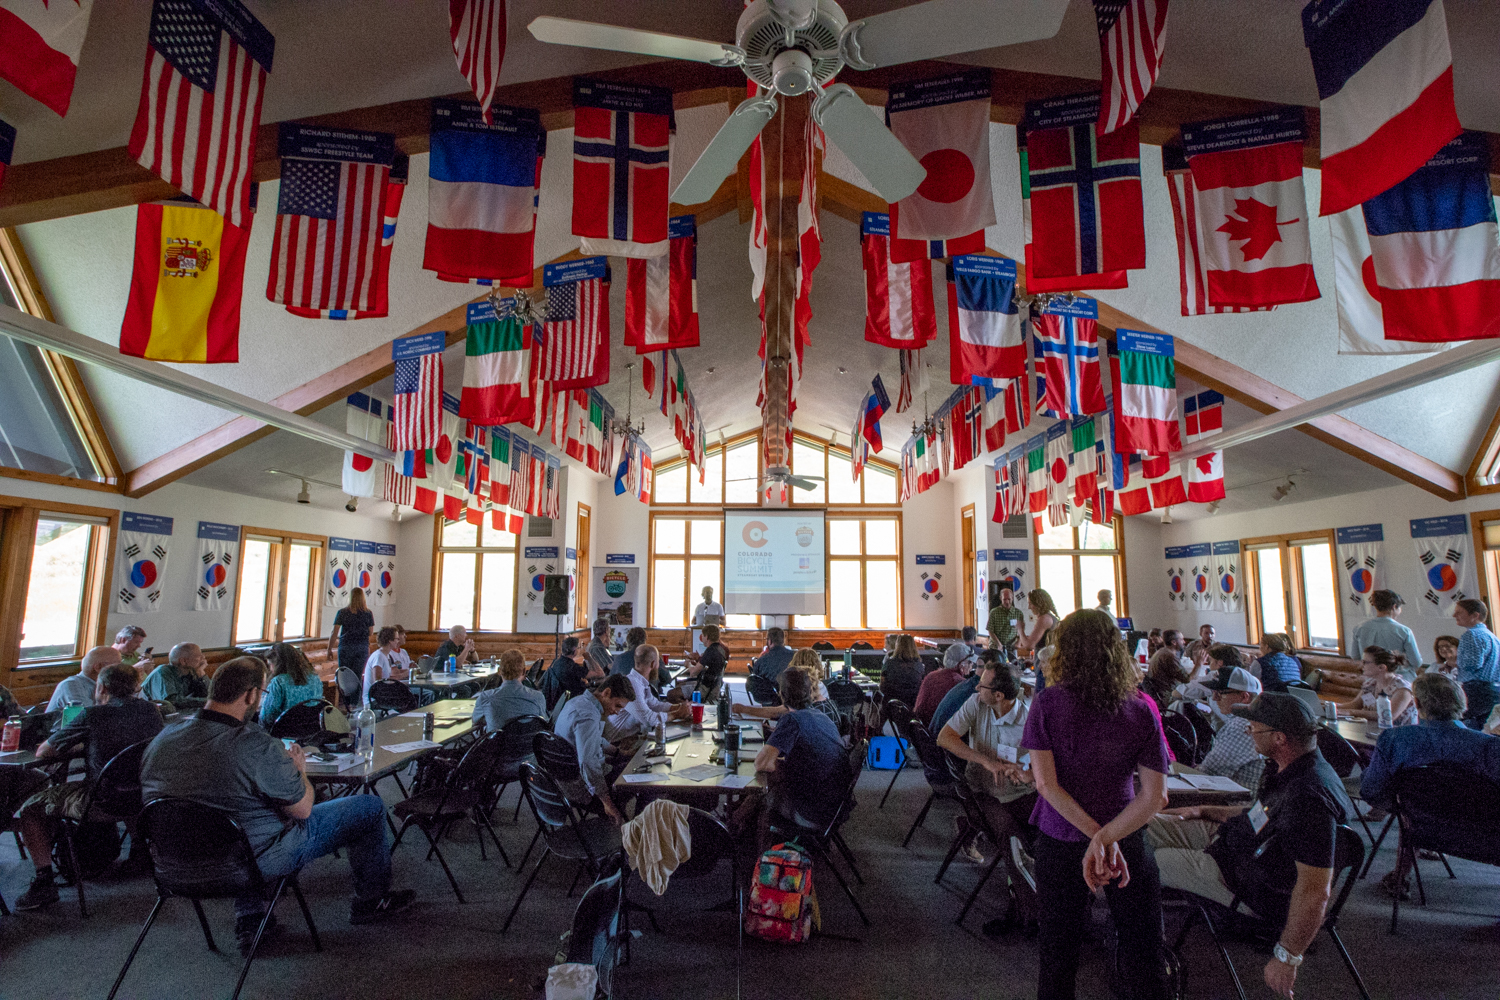 View from the back of a large community room with national flags hanging from a high ceiling. There are many people seated at long tables looking toward the front of the room, away from the camera, where a person is speaking at a podium and projecting a presentation on a screen behind them.